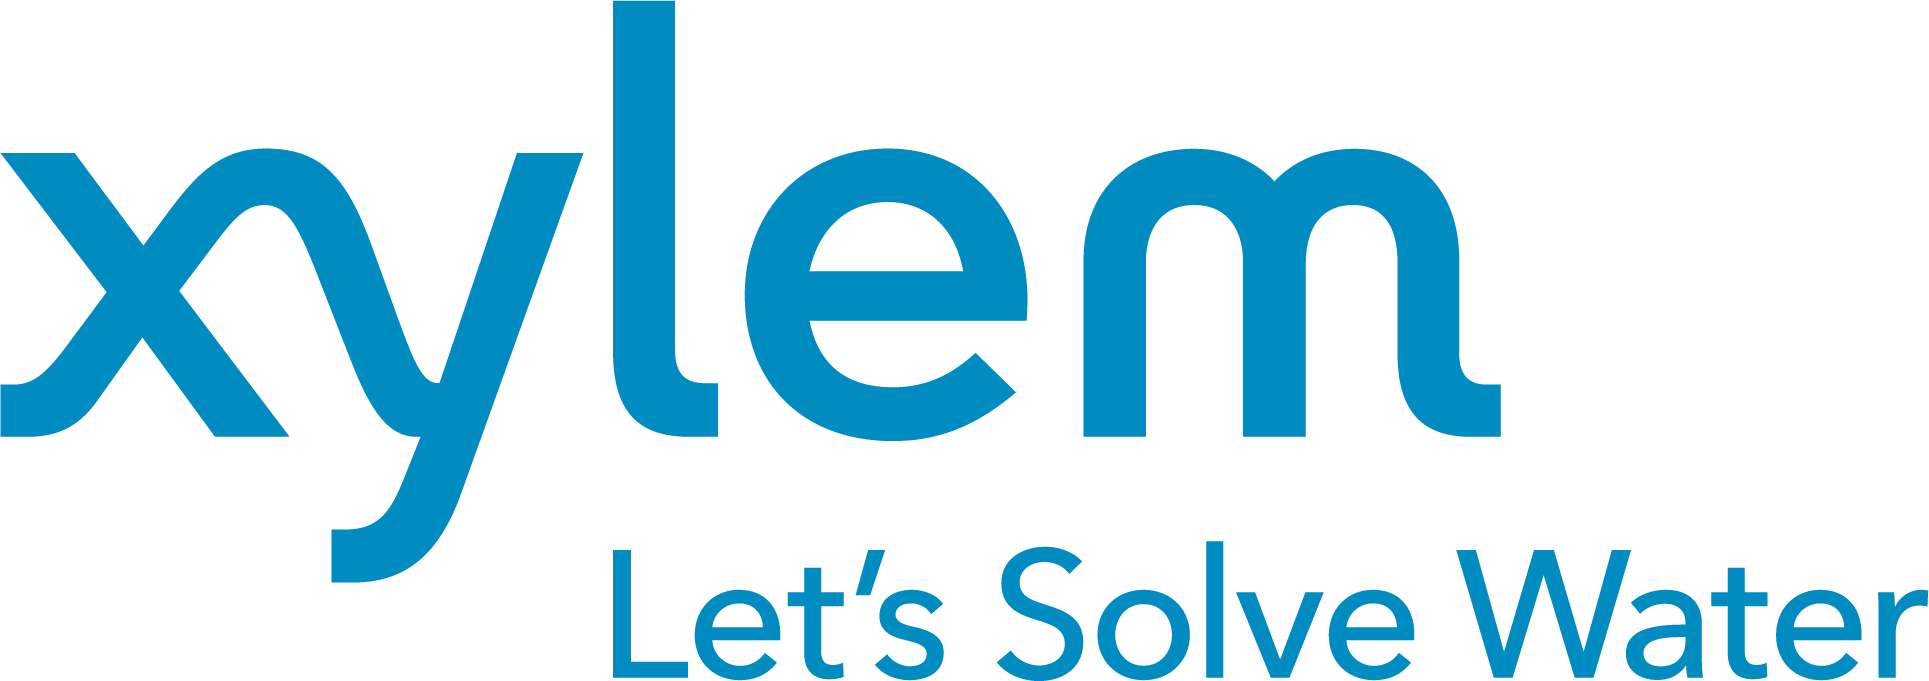 Xylem_Corporate Logo.png